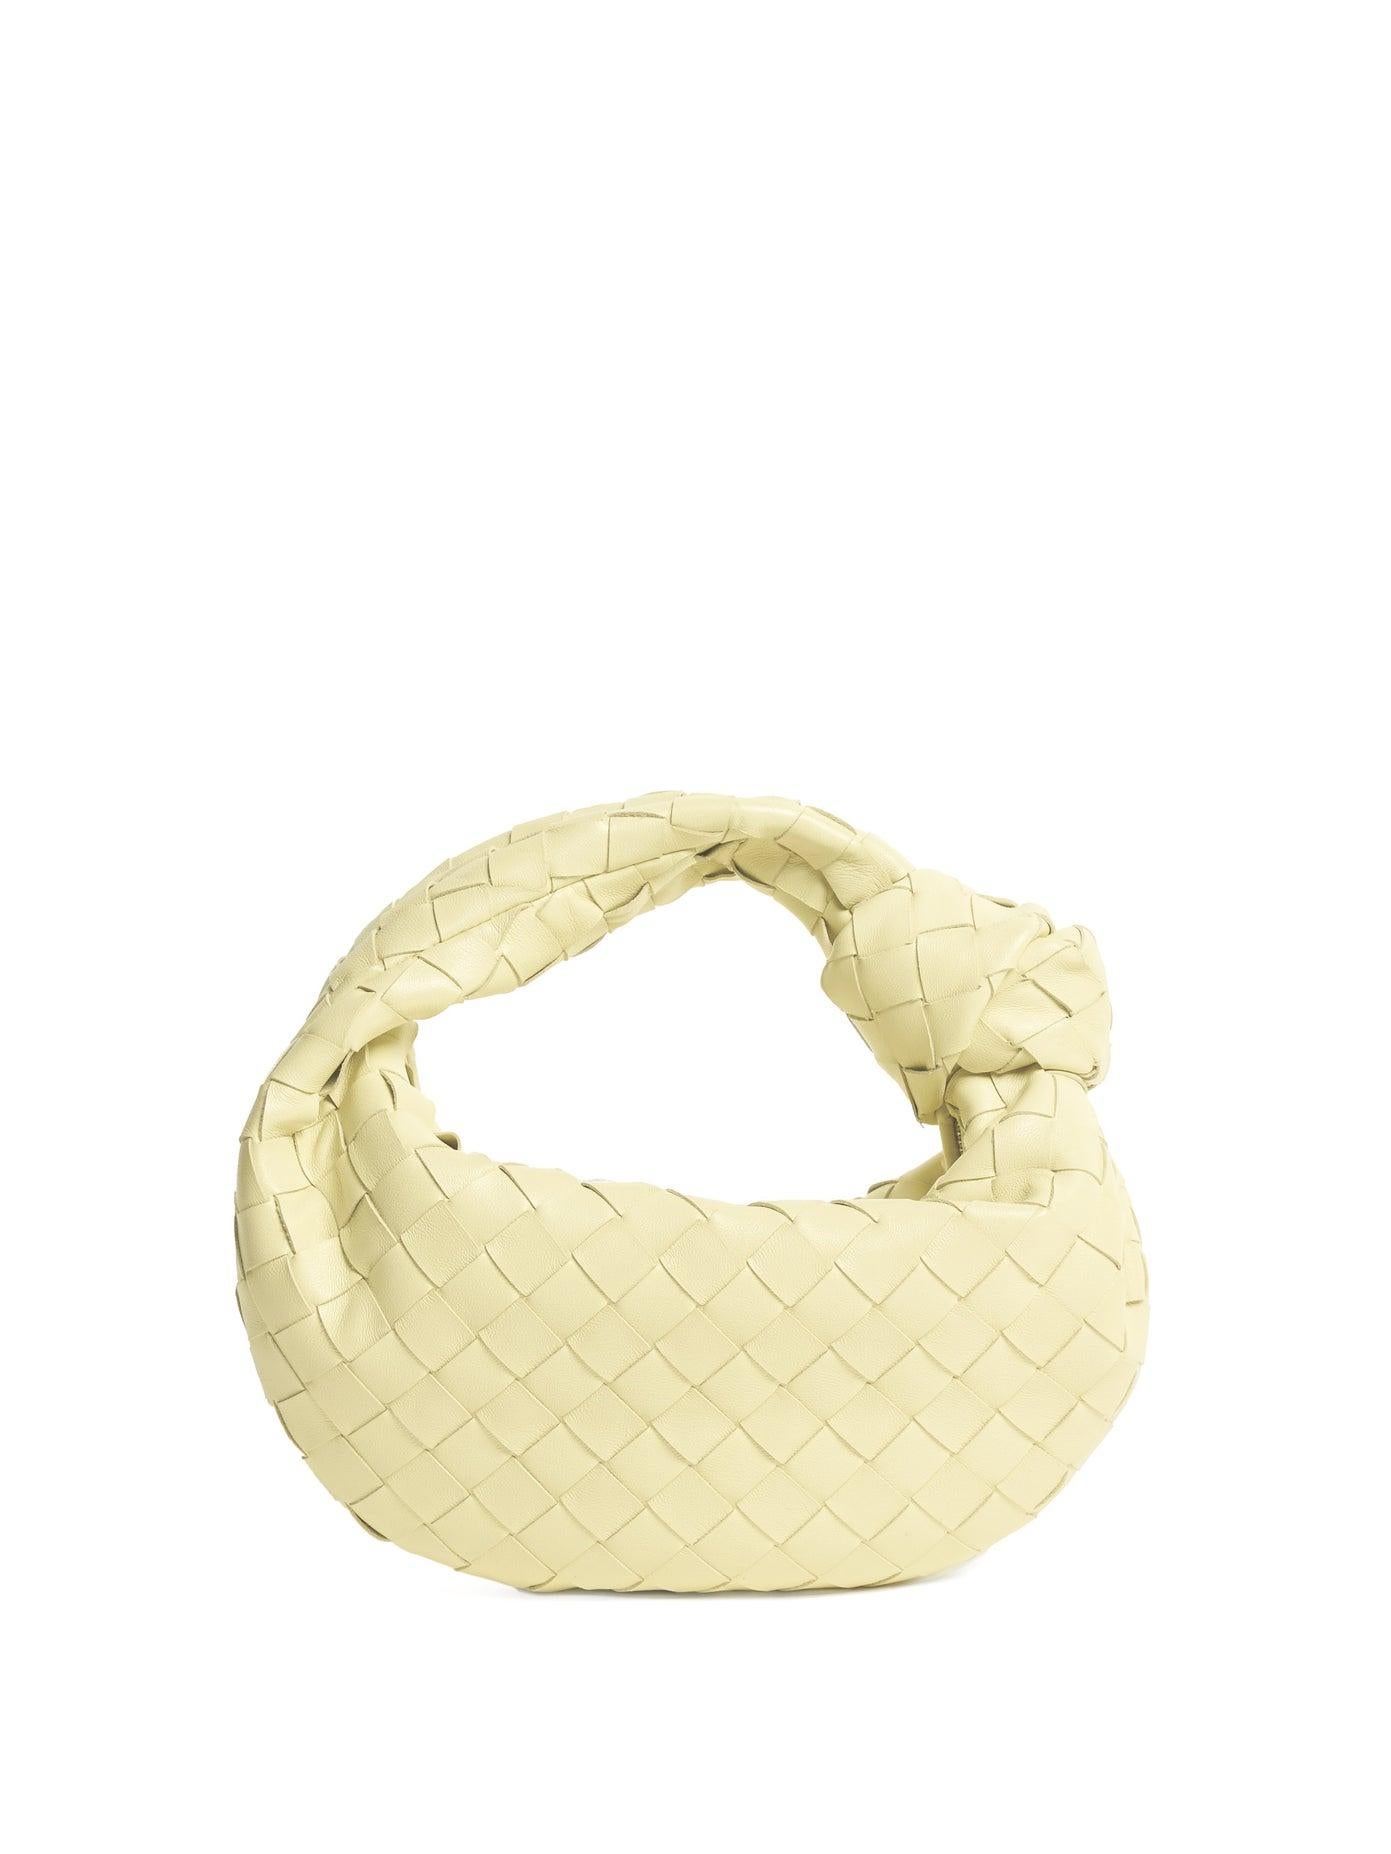 This Bottega bag is made with intrecciato-woven nappa lambskin in a light lemon yellow (ice cream) color. Featuring a fixed shoulder strap, knotted accent at strap base, zip closure, logo embossed at interior, tonal calfskin lining and silver-tone